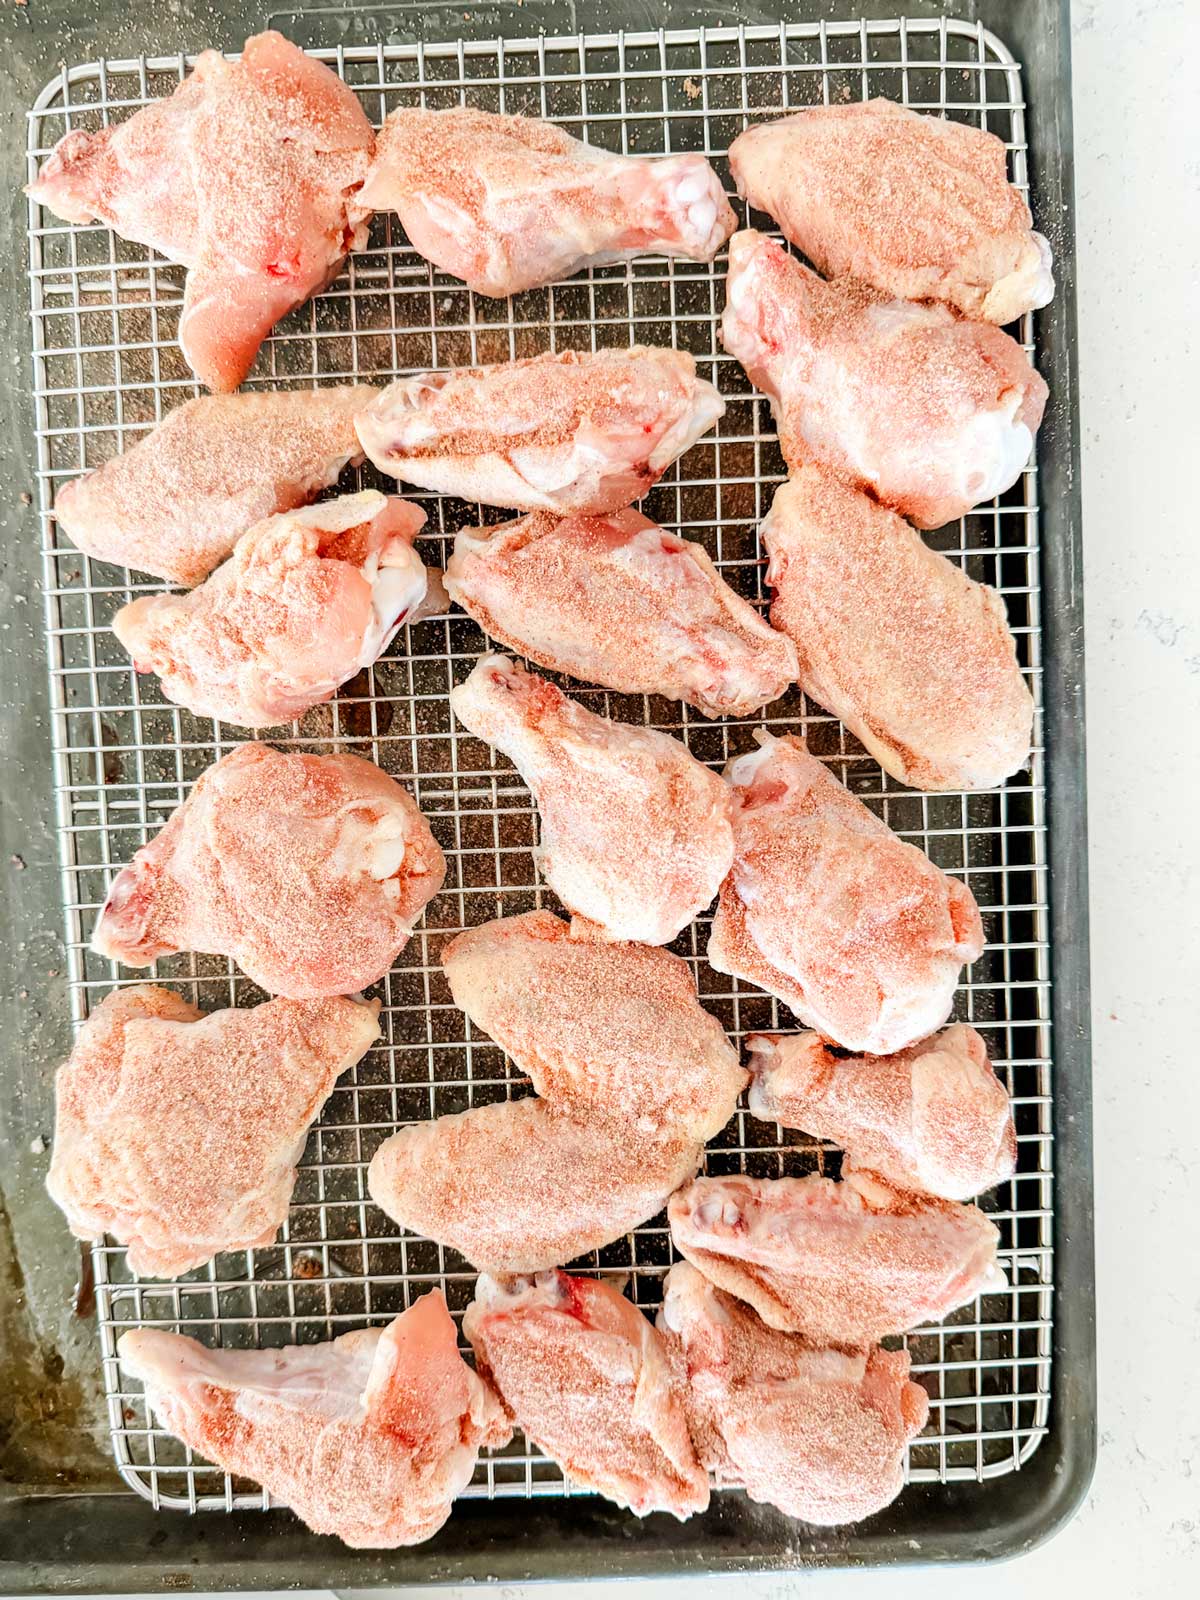 Seasoned chicken wings ready to cook.